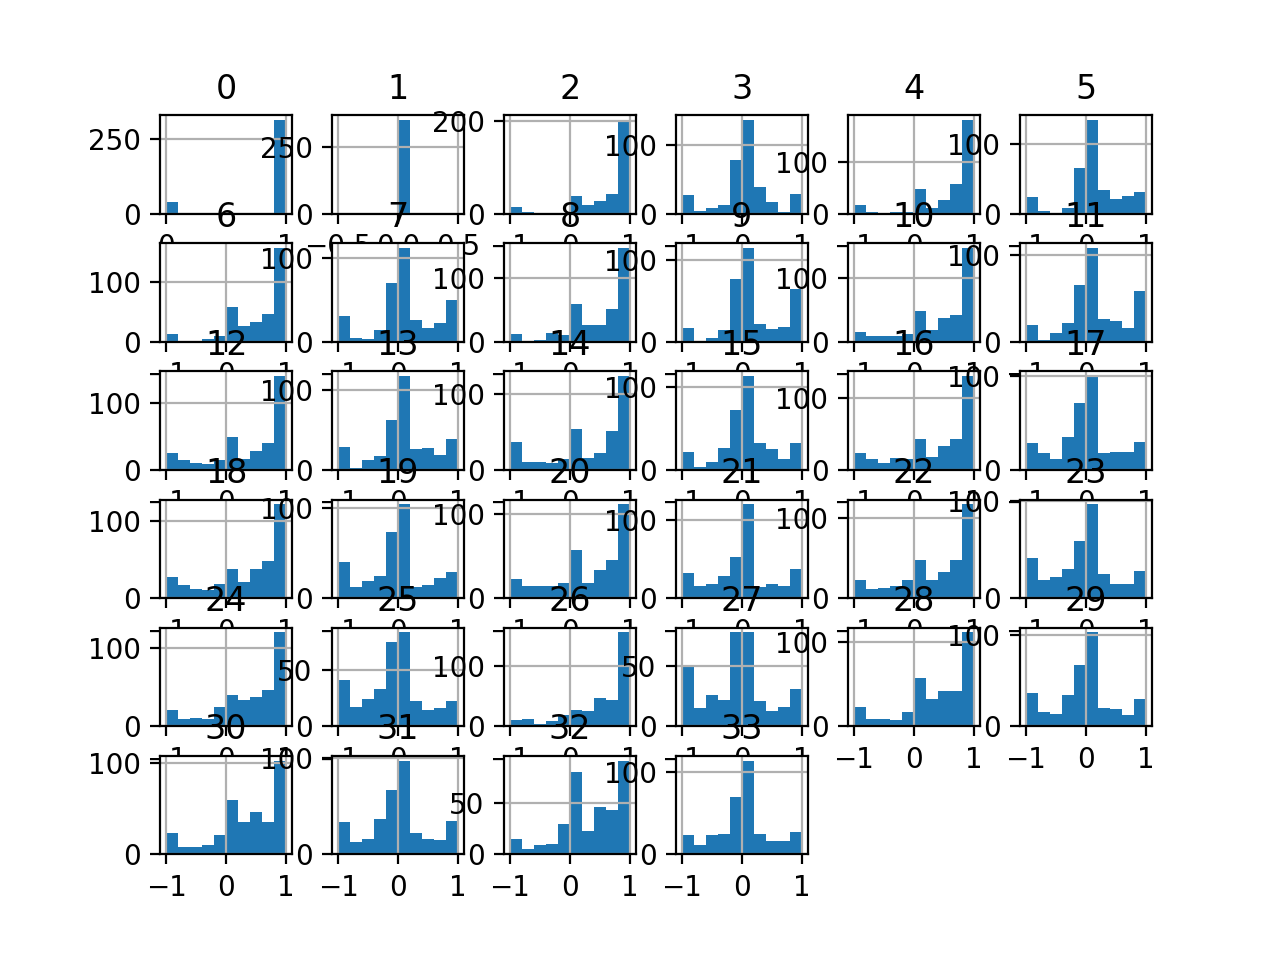 Histograms of the Ionosphere Classification Dataset